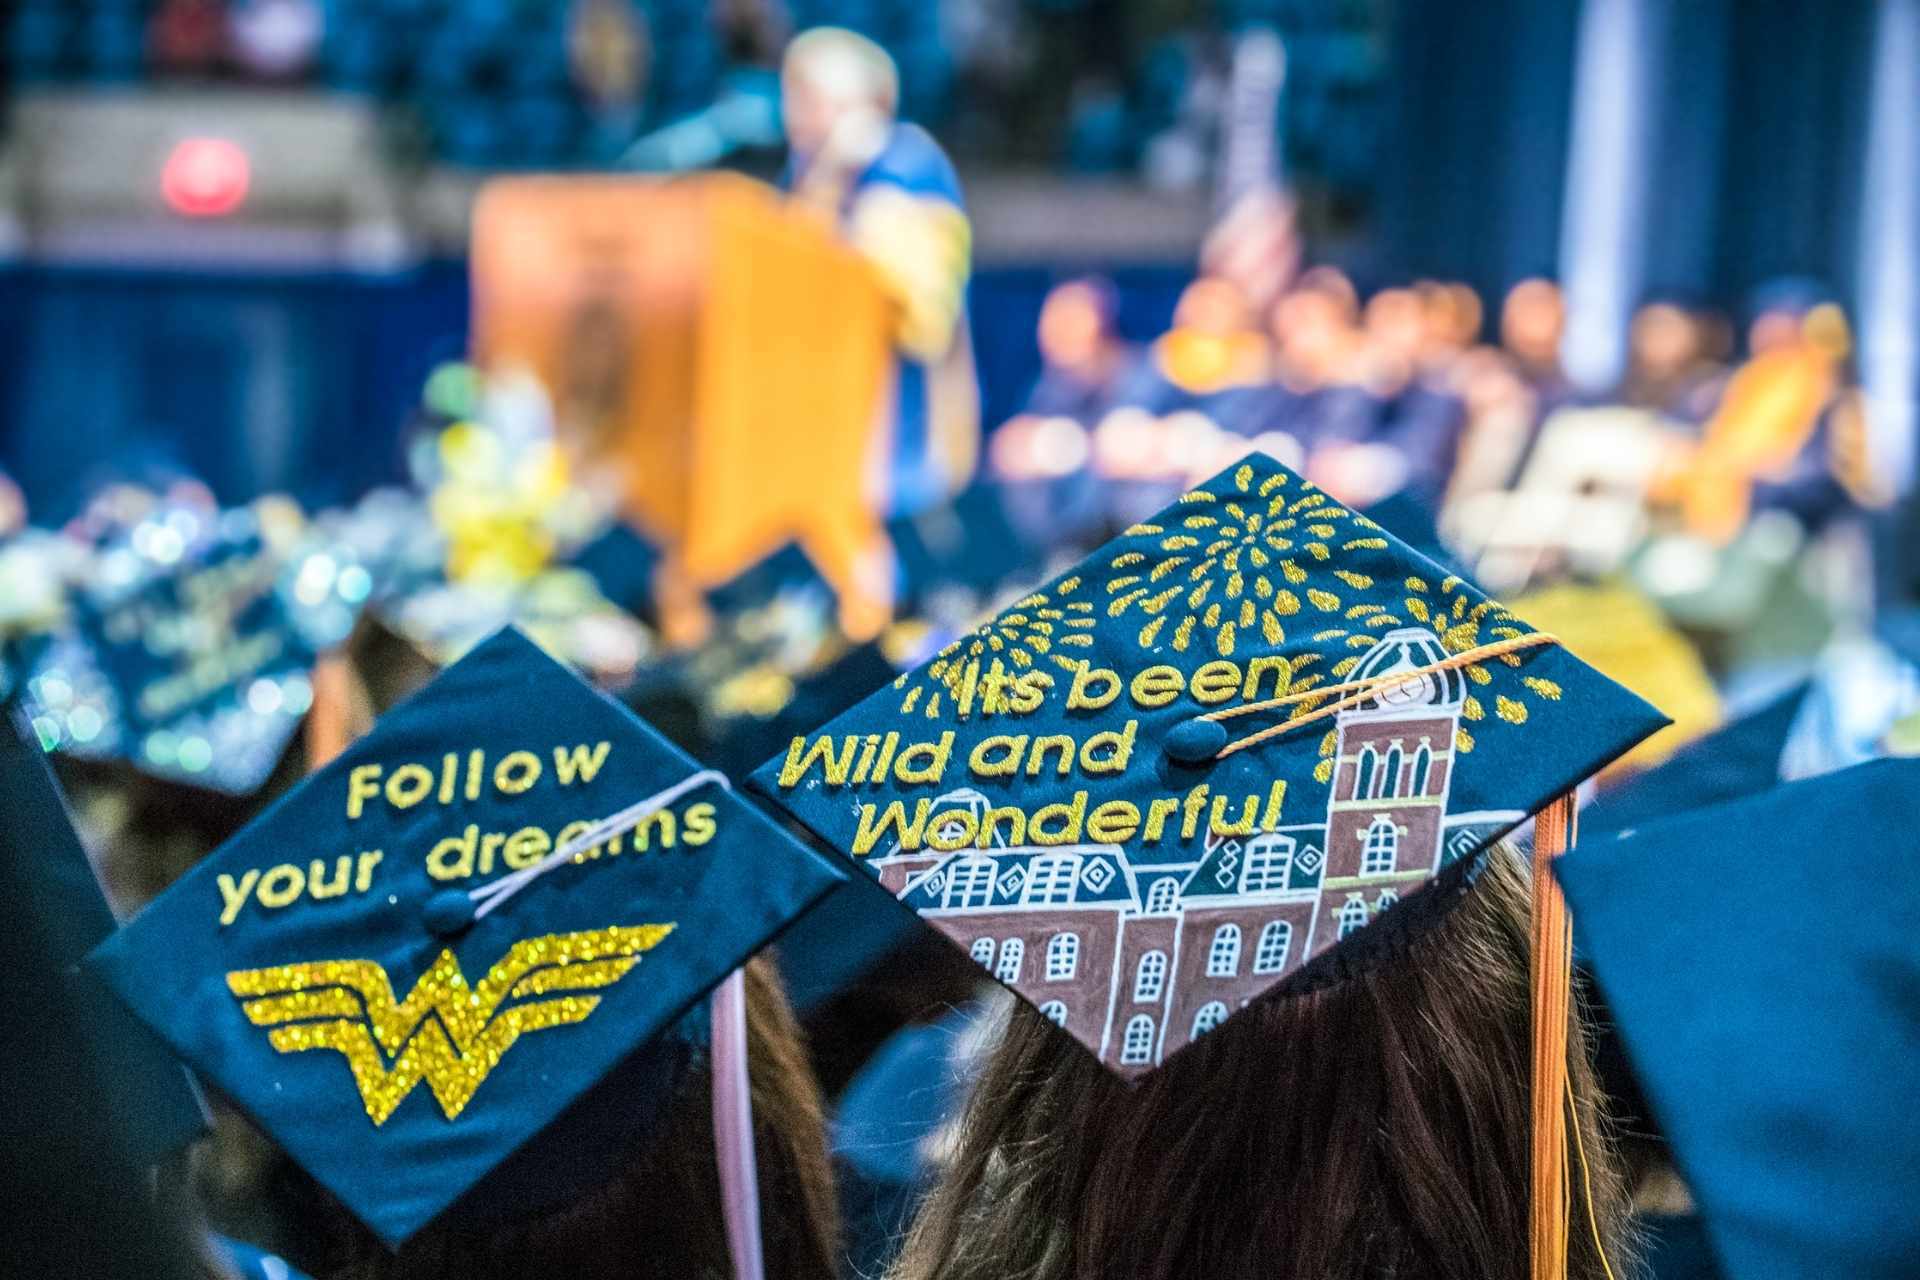 WVU FirstGen has joined the First Scholars Network to help guide first generation college students to be successful from their first day on campus to commencement. (WVU Photo)